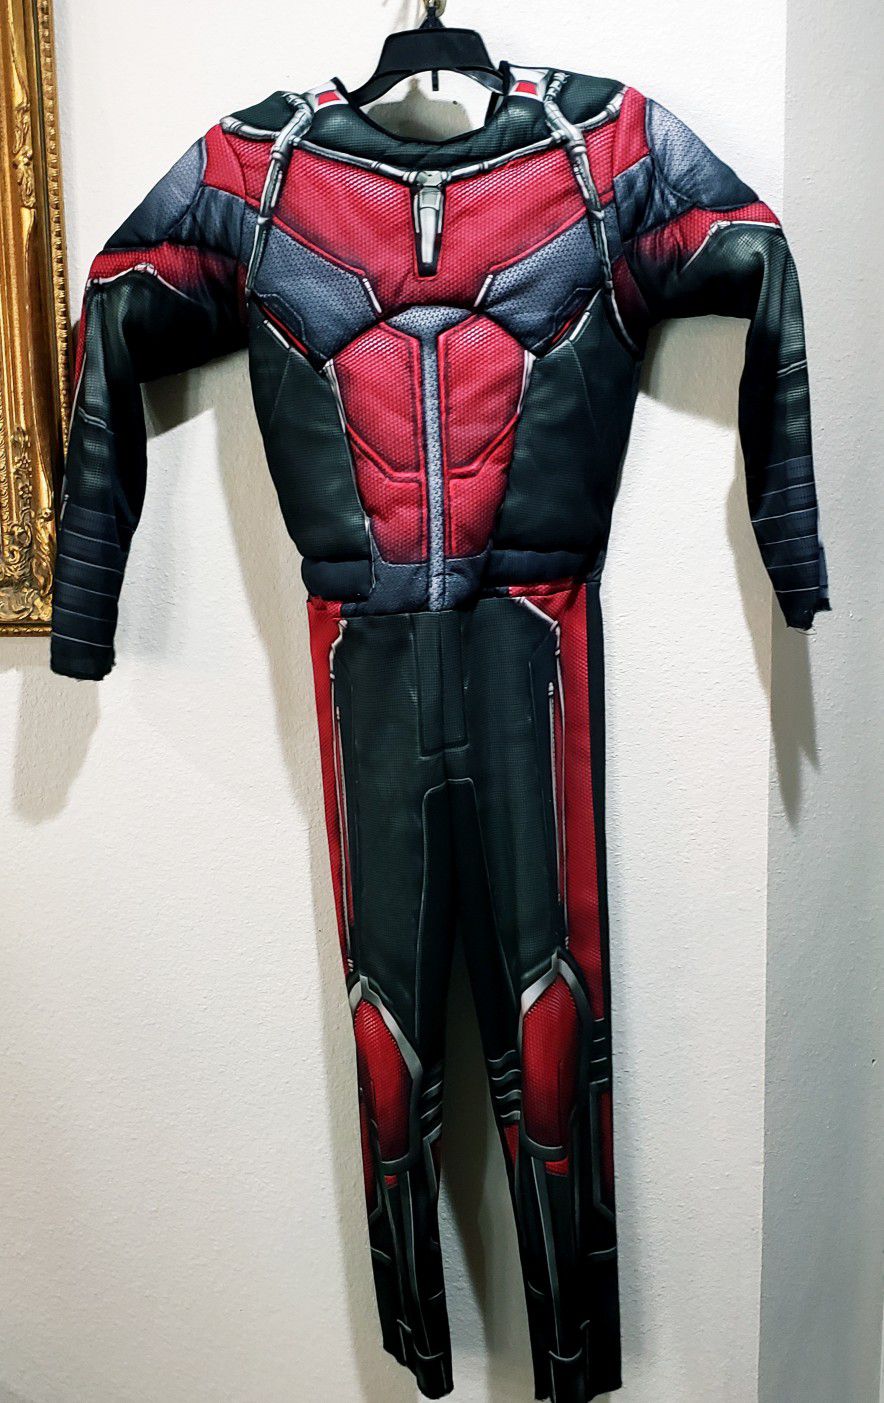 Ant Man Costume 
size Youth Large (12) 
Chest: 30-34 
Waist: 25-27
Height: 57-64
